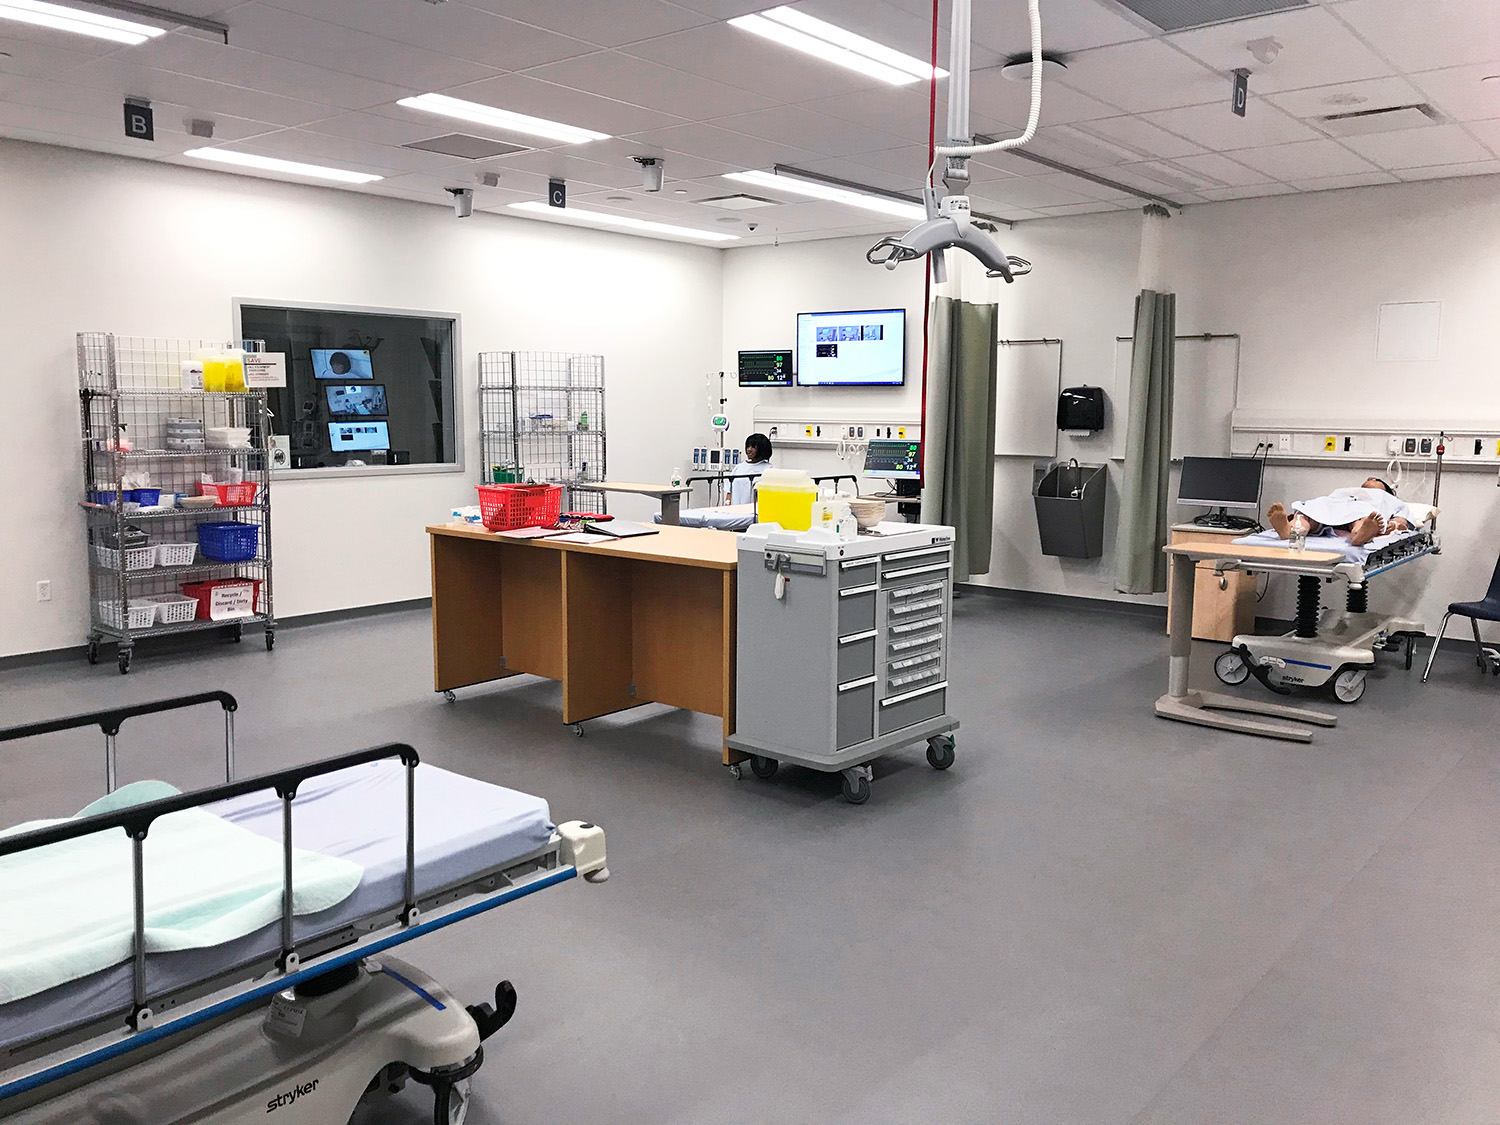 Each simulation lab includes as many as eight bed stations. A patient simulator is connected to the vital signs PC for that demonstration bed station prior to the lesson.